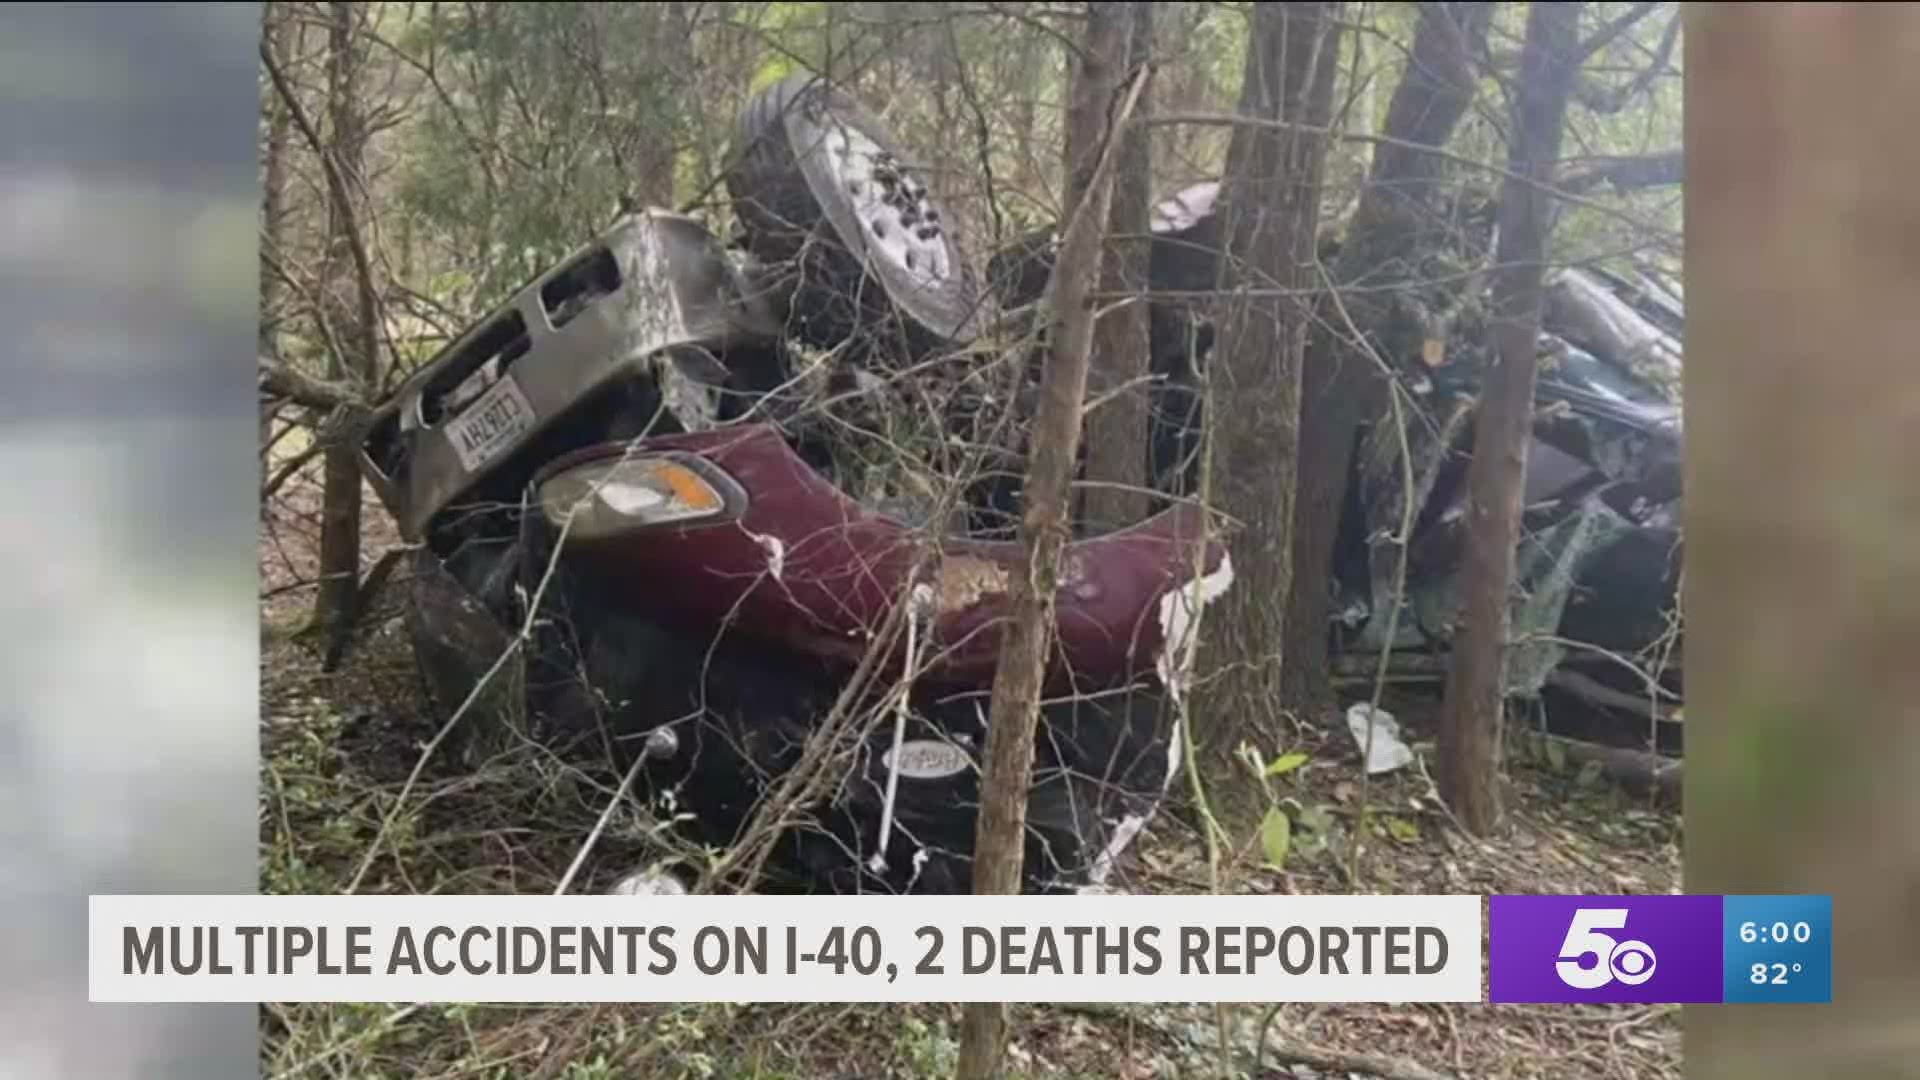 Drivers were at a standstill along parts of I-40 east of Clarksville Wednesday morning due to several cars crashing in the area. https://bit.ly/3hEUQ8z